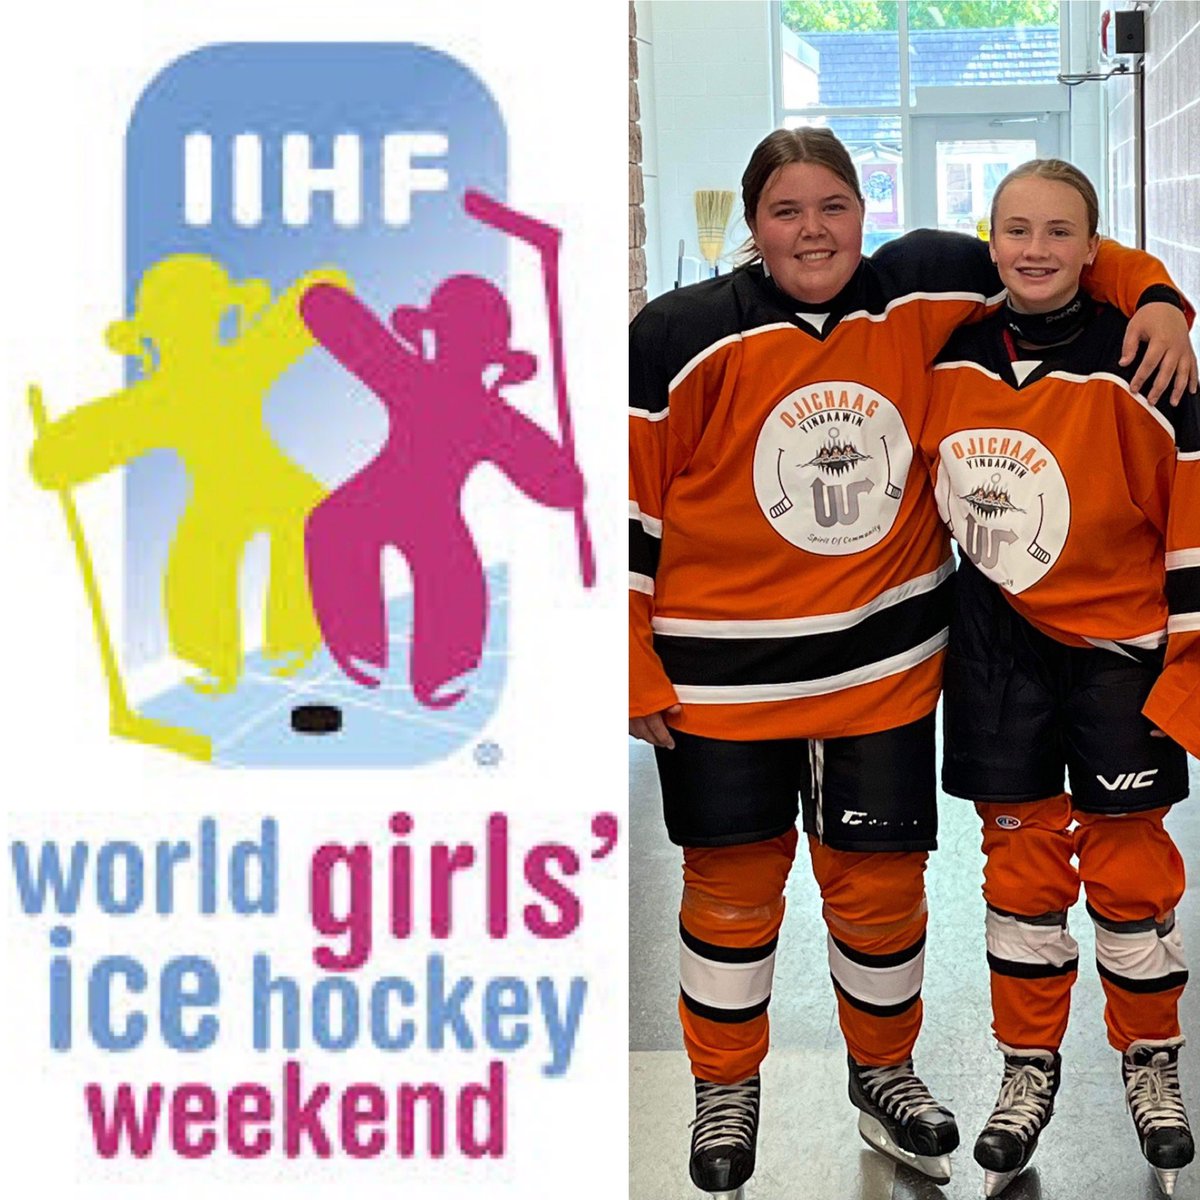 We celebrated World Girls Ice Hockey Weekend #WGIHW while continuing our Spirit of Community event recognizing Truth & Reconciliation in Canada & our Communities 🟠🏒 Our girls sported commemorative orange jerseys featuring the Ojichaag Yindaawin Spirit of Community Logo 🧡🏒🟠